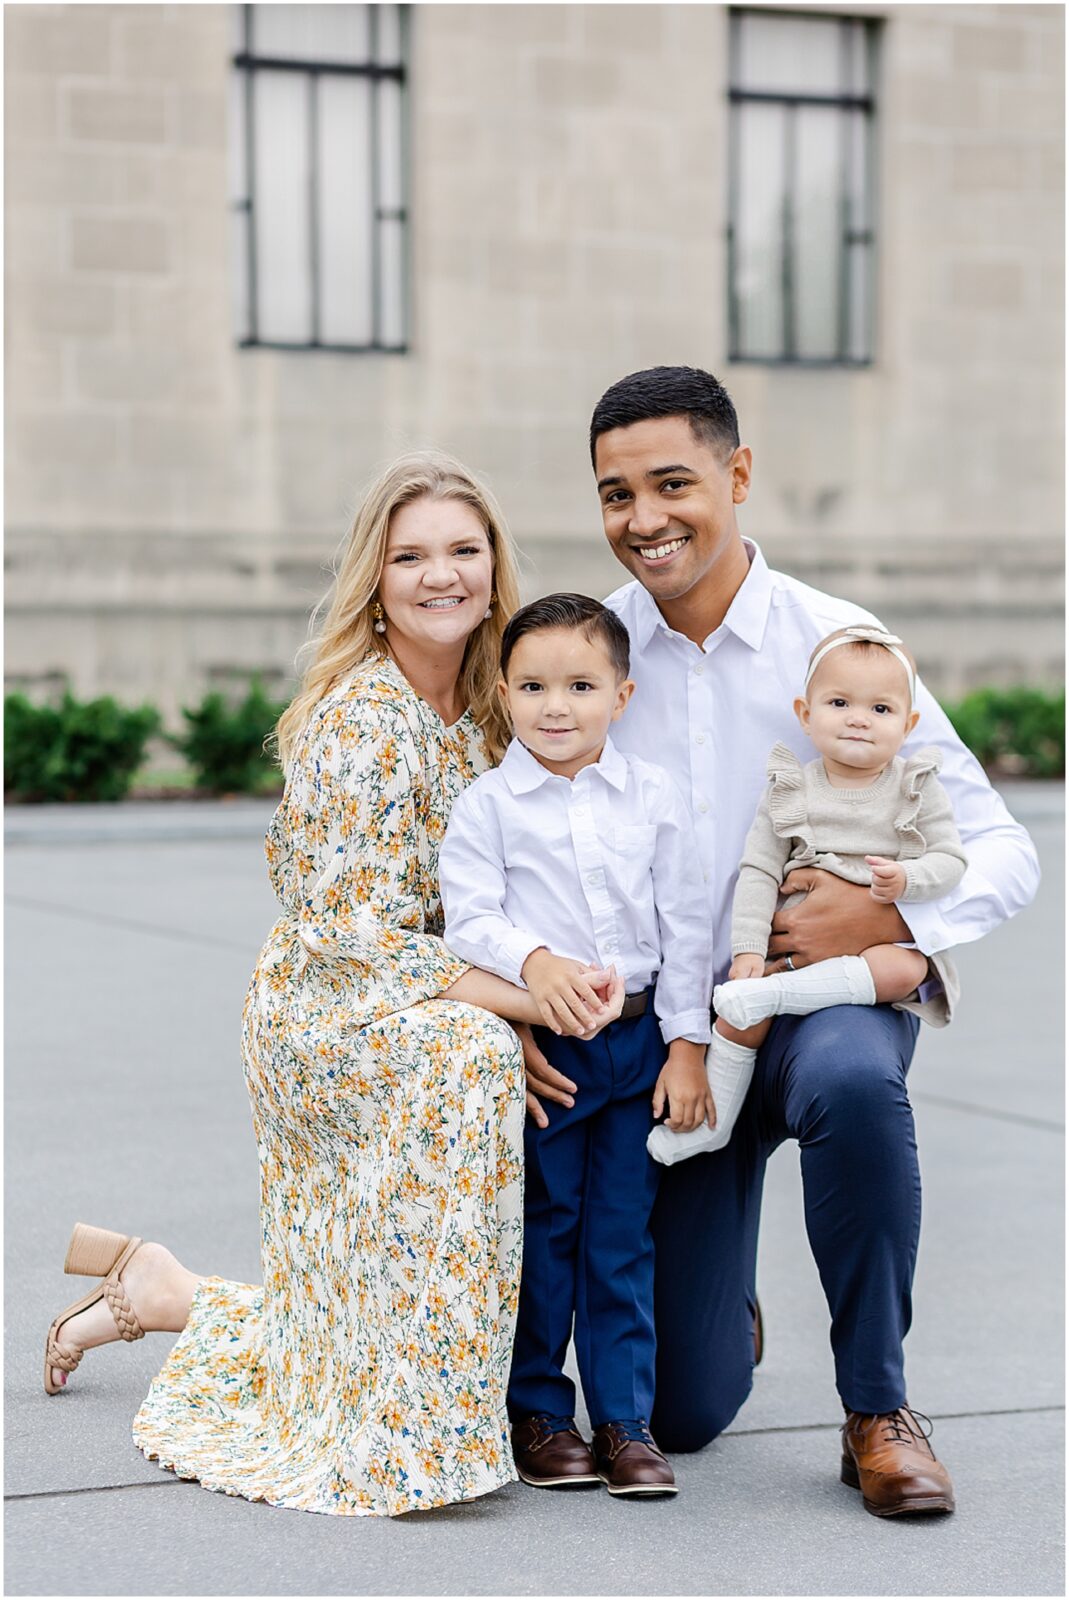 Contemporary & Romantic & Timeless Portrait Family Photography in Kansas City - What to wear for a family session - Overland Park Family Portrait Photographer - Mariam Saifan Photography